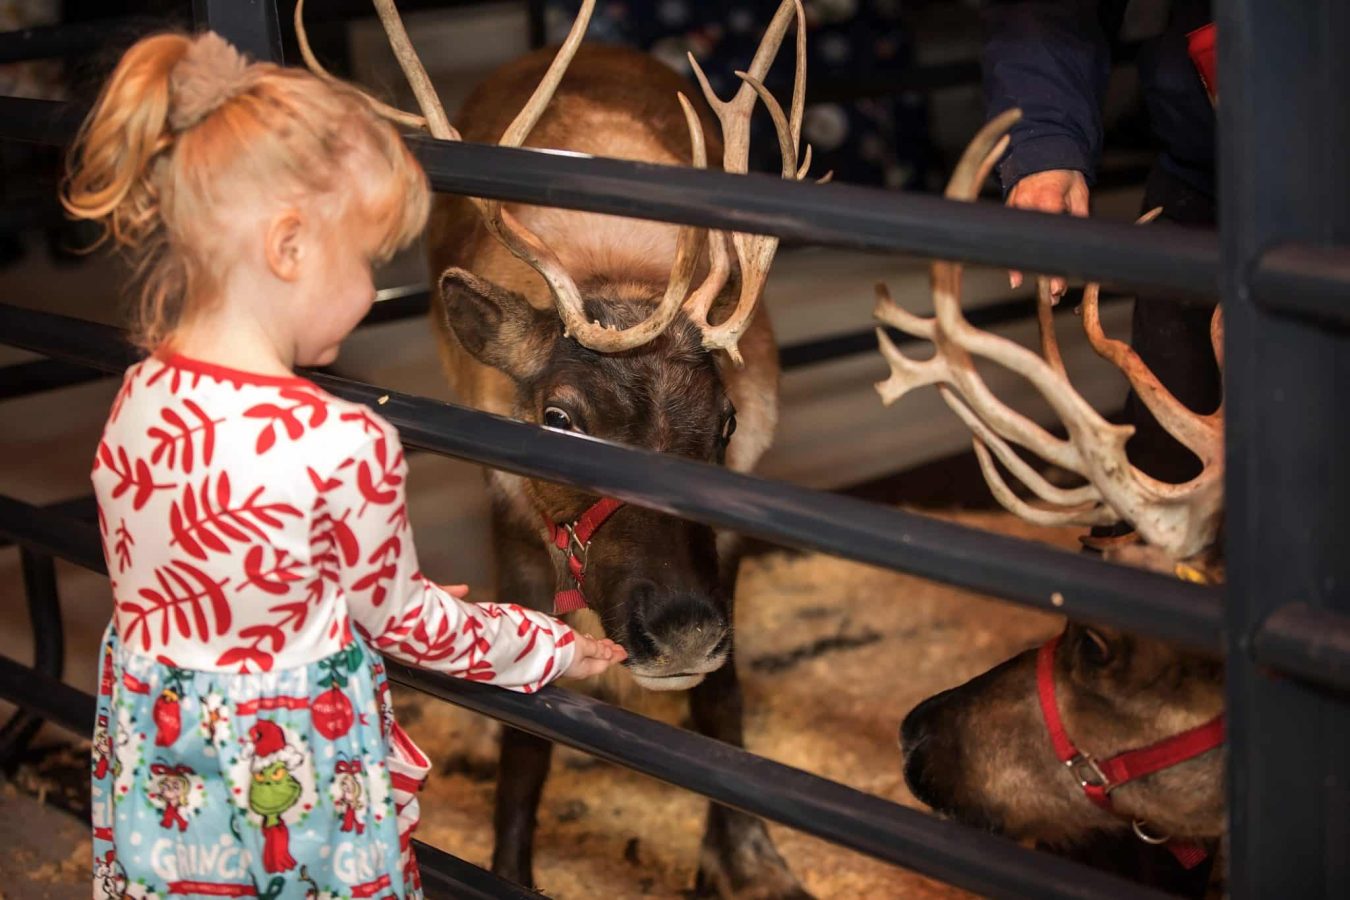 Image from Comfort and Joy - A little girl touching a reindeer